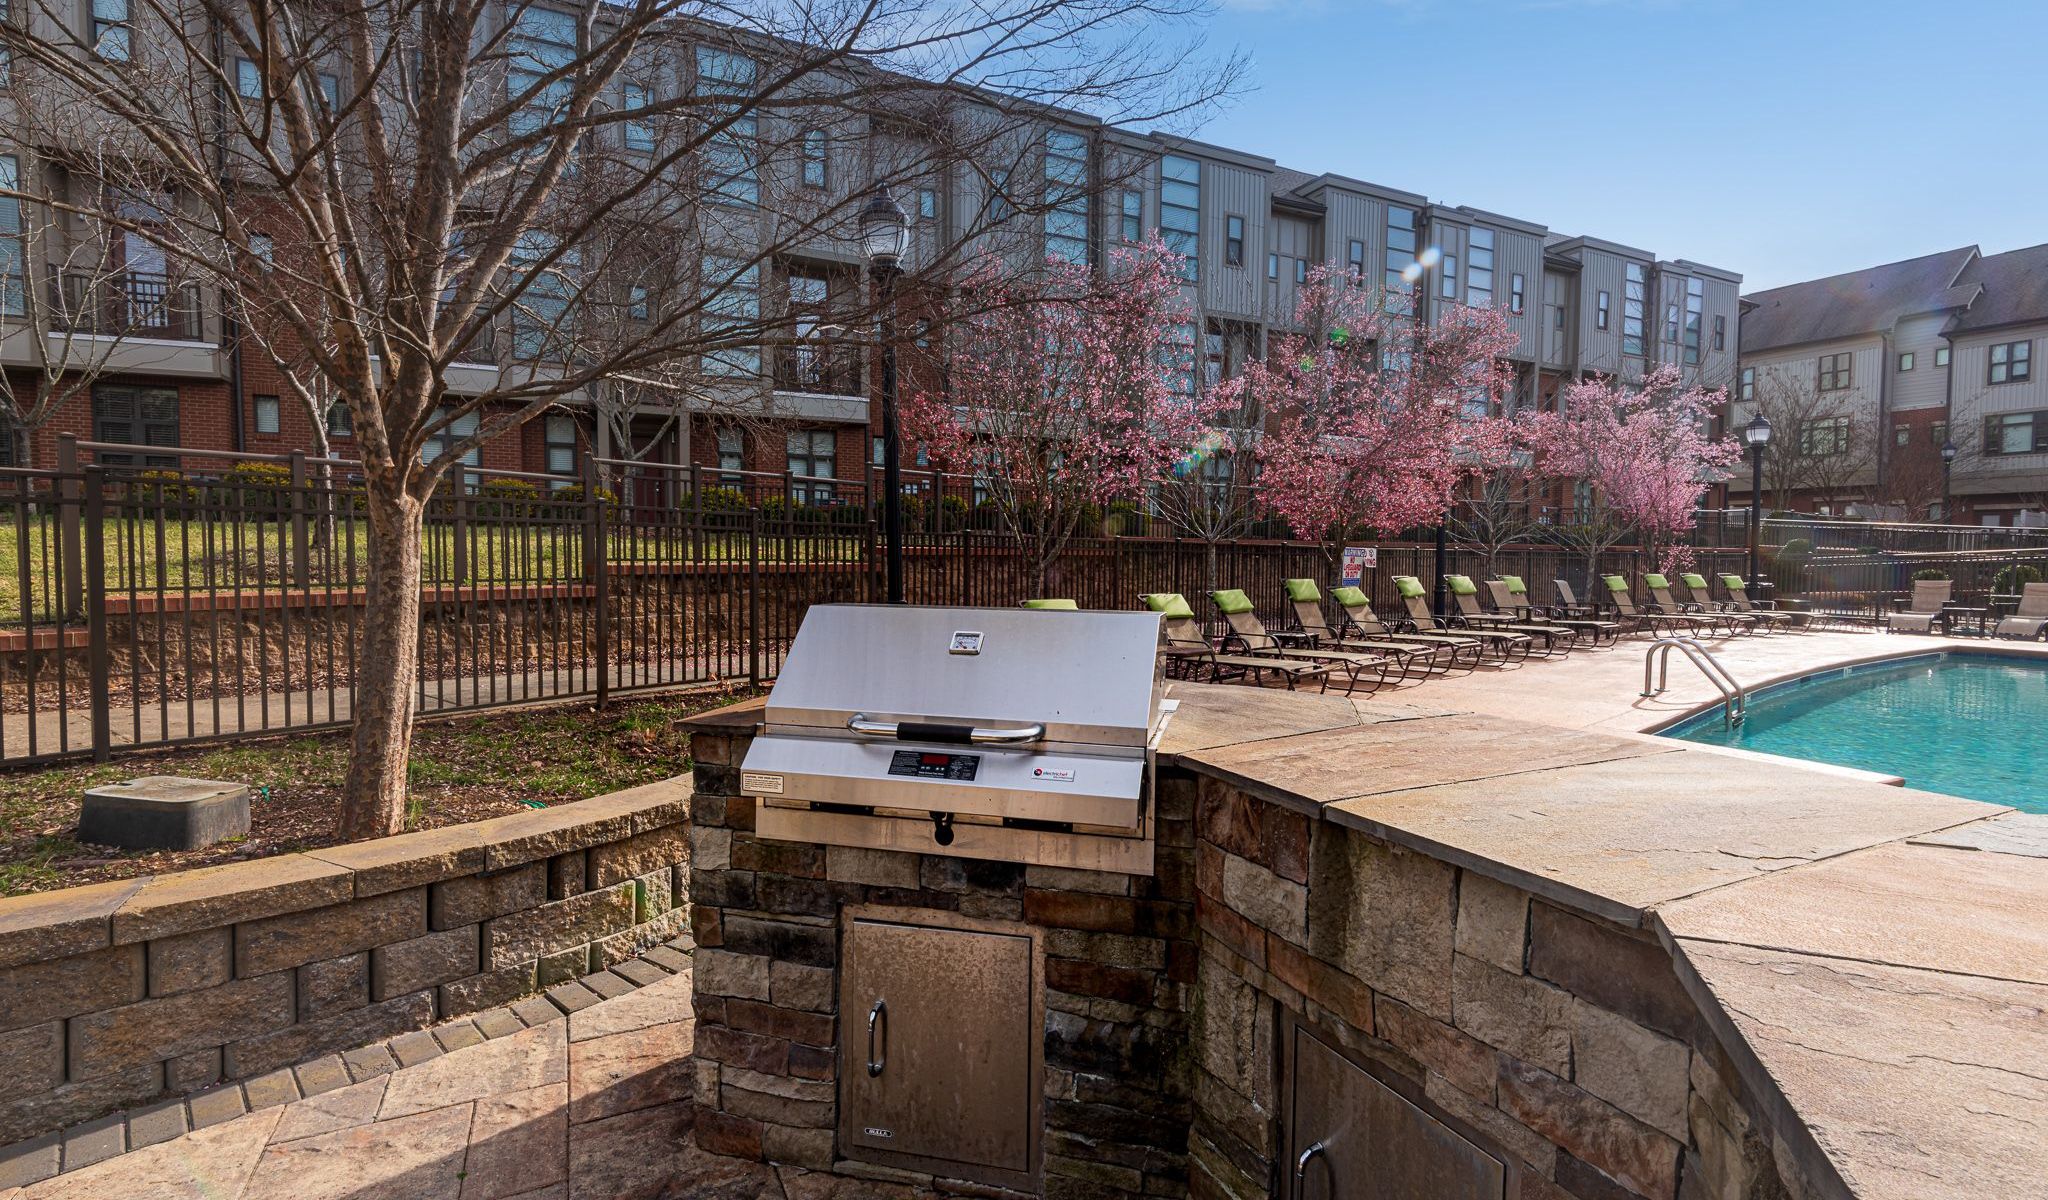 Chapel Hill North Apartments outdoor grilling station with stainless steel outdoor bbq grill and a stone bar area